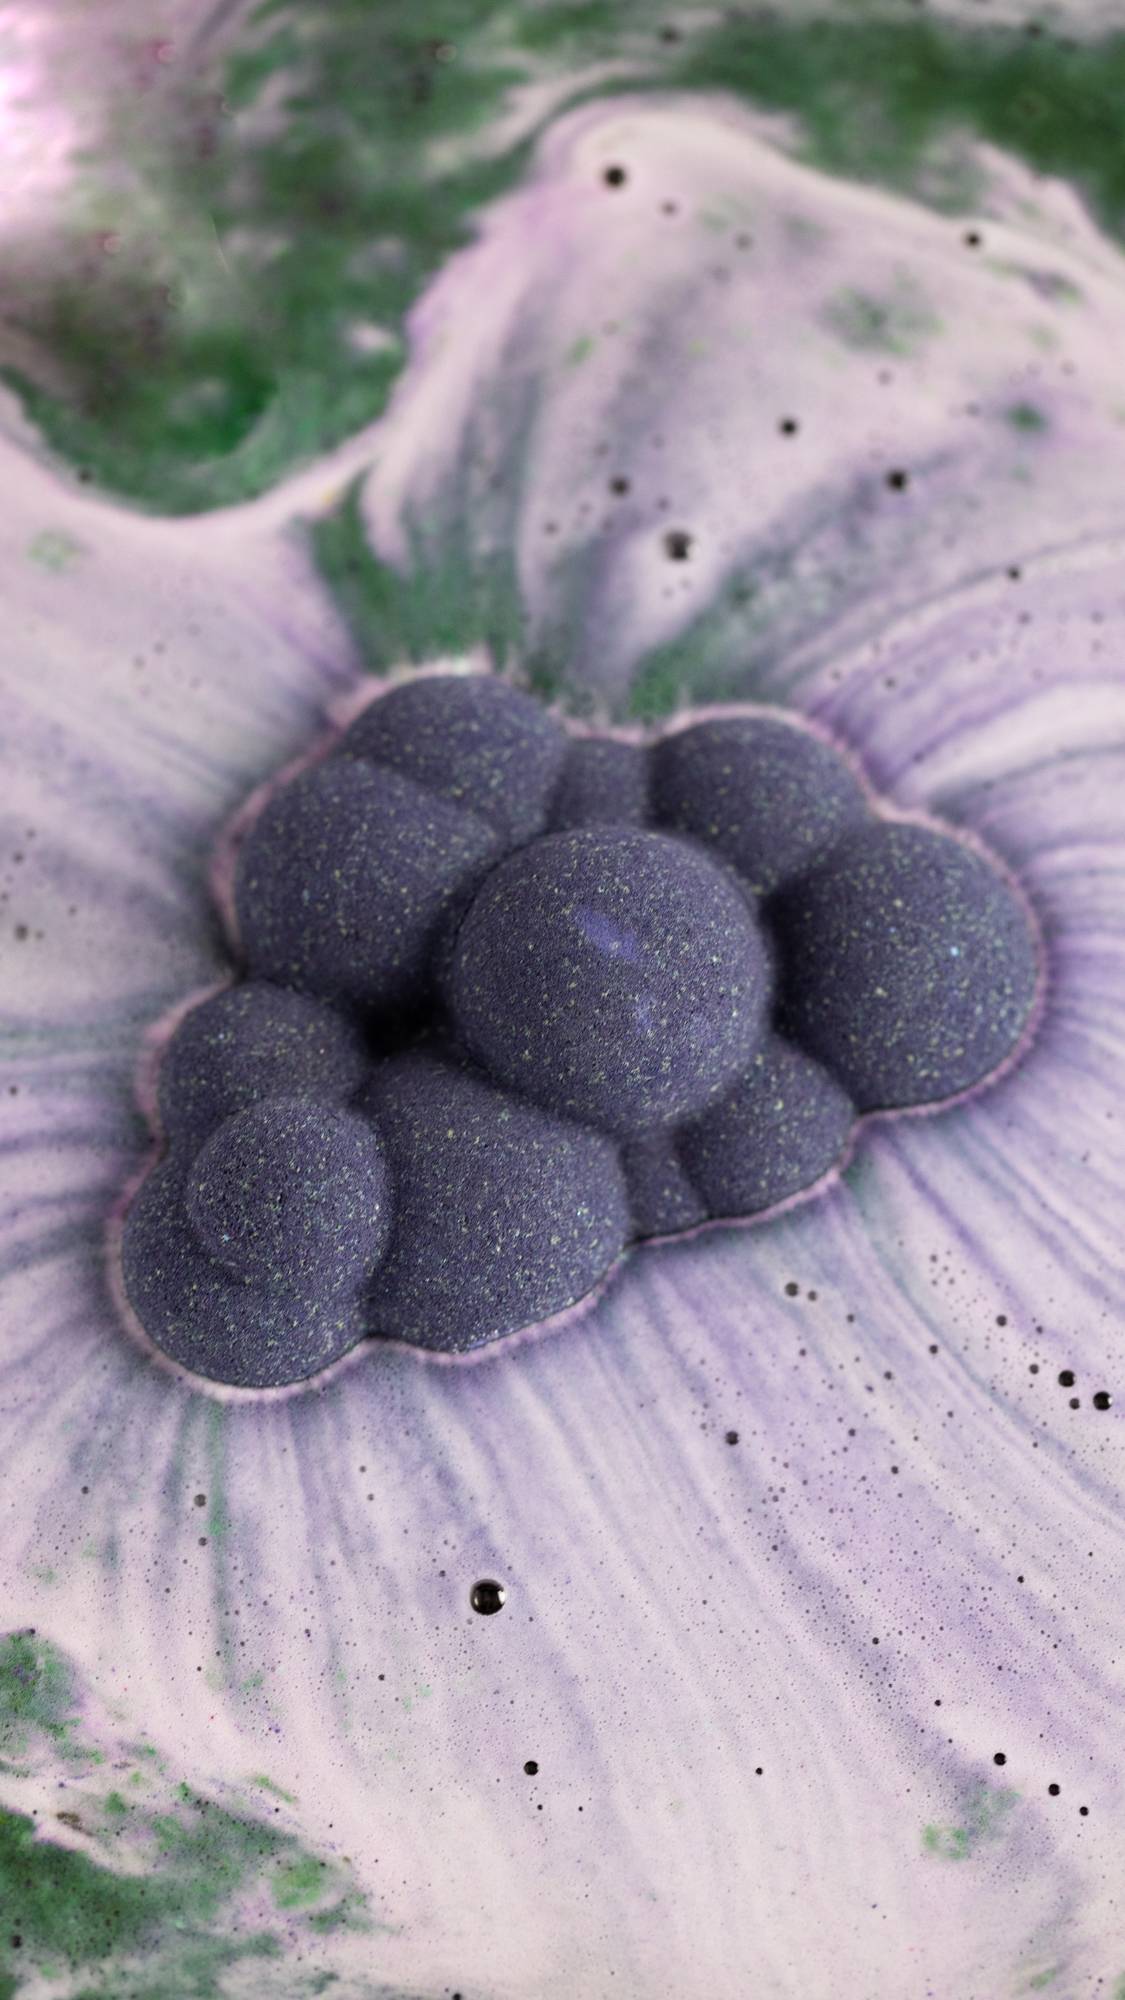 The Cloud bath bombs sits atop the bathwater dispersing enchanting deep purples and green swirls across the surface.